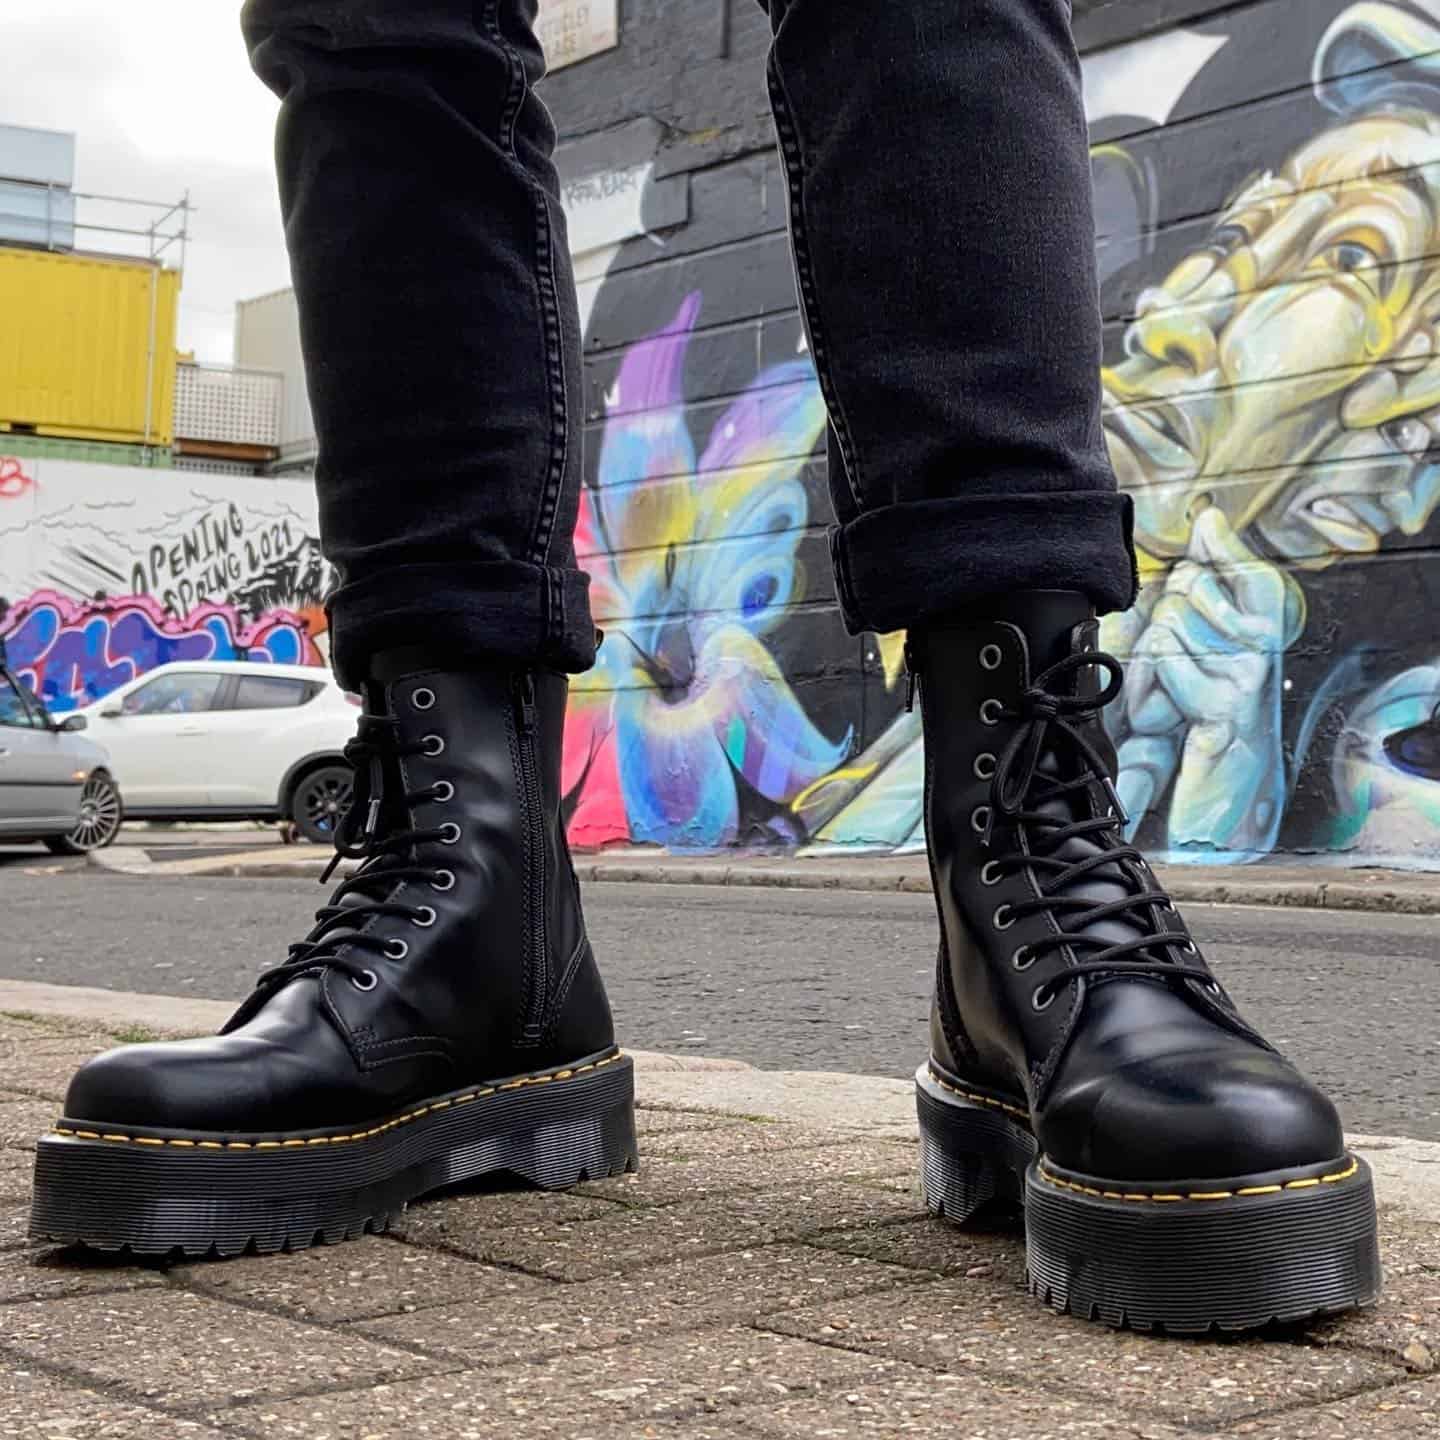 wearing a pair of jadon boots by dr martens